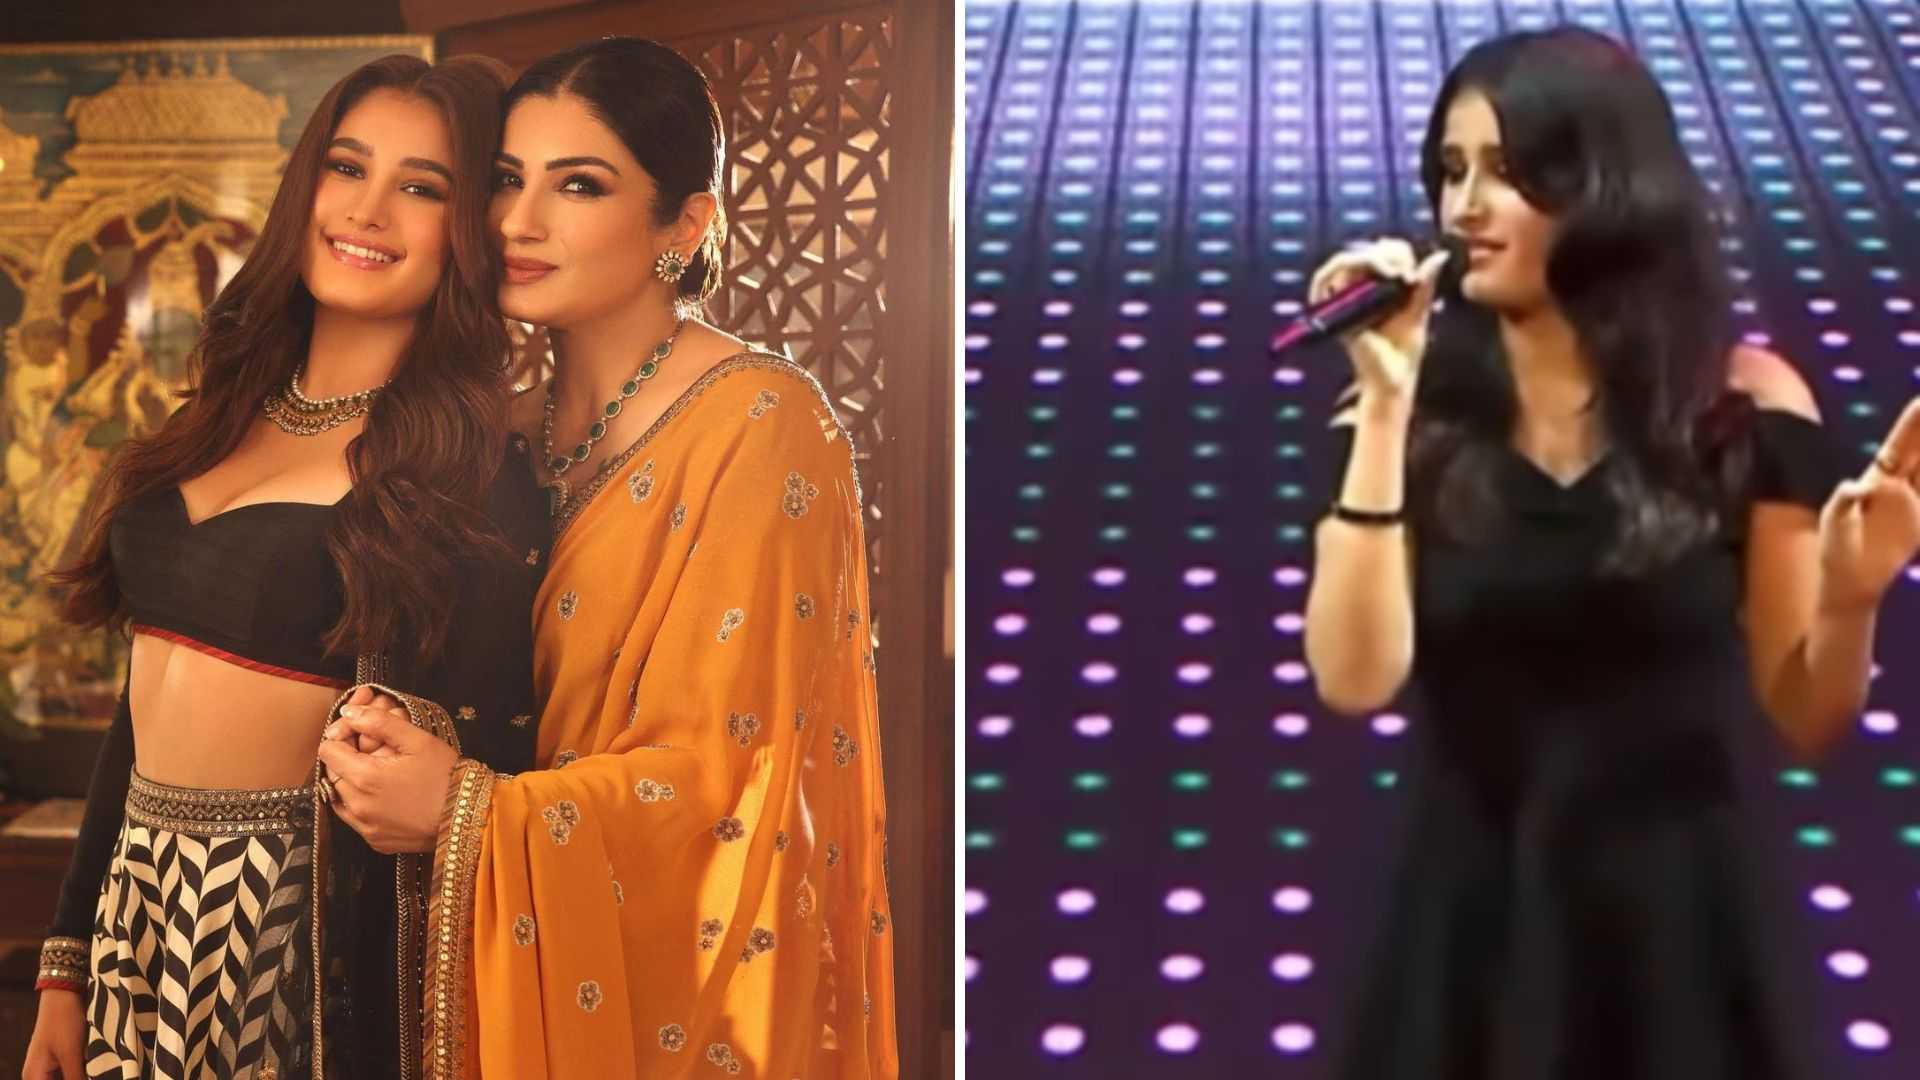 Ahead of her acting debut, Raveena Tandon's daughter Rasha Thadani impresses fans with her singing talent